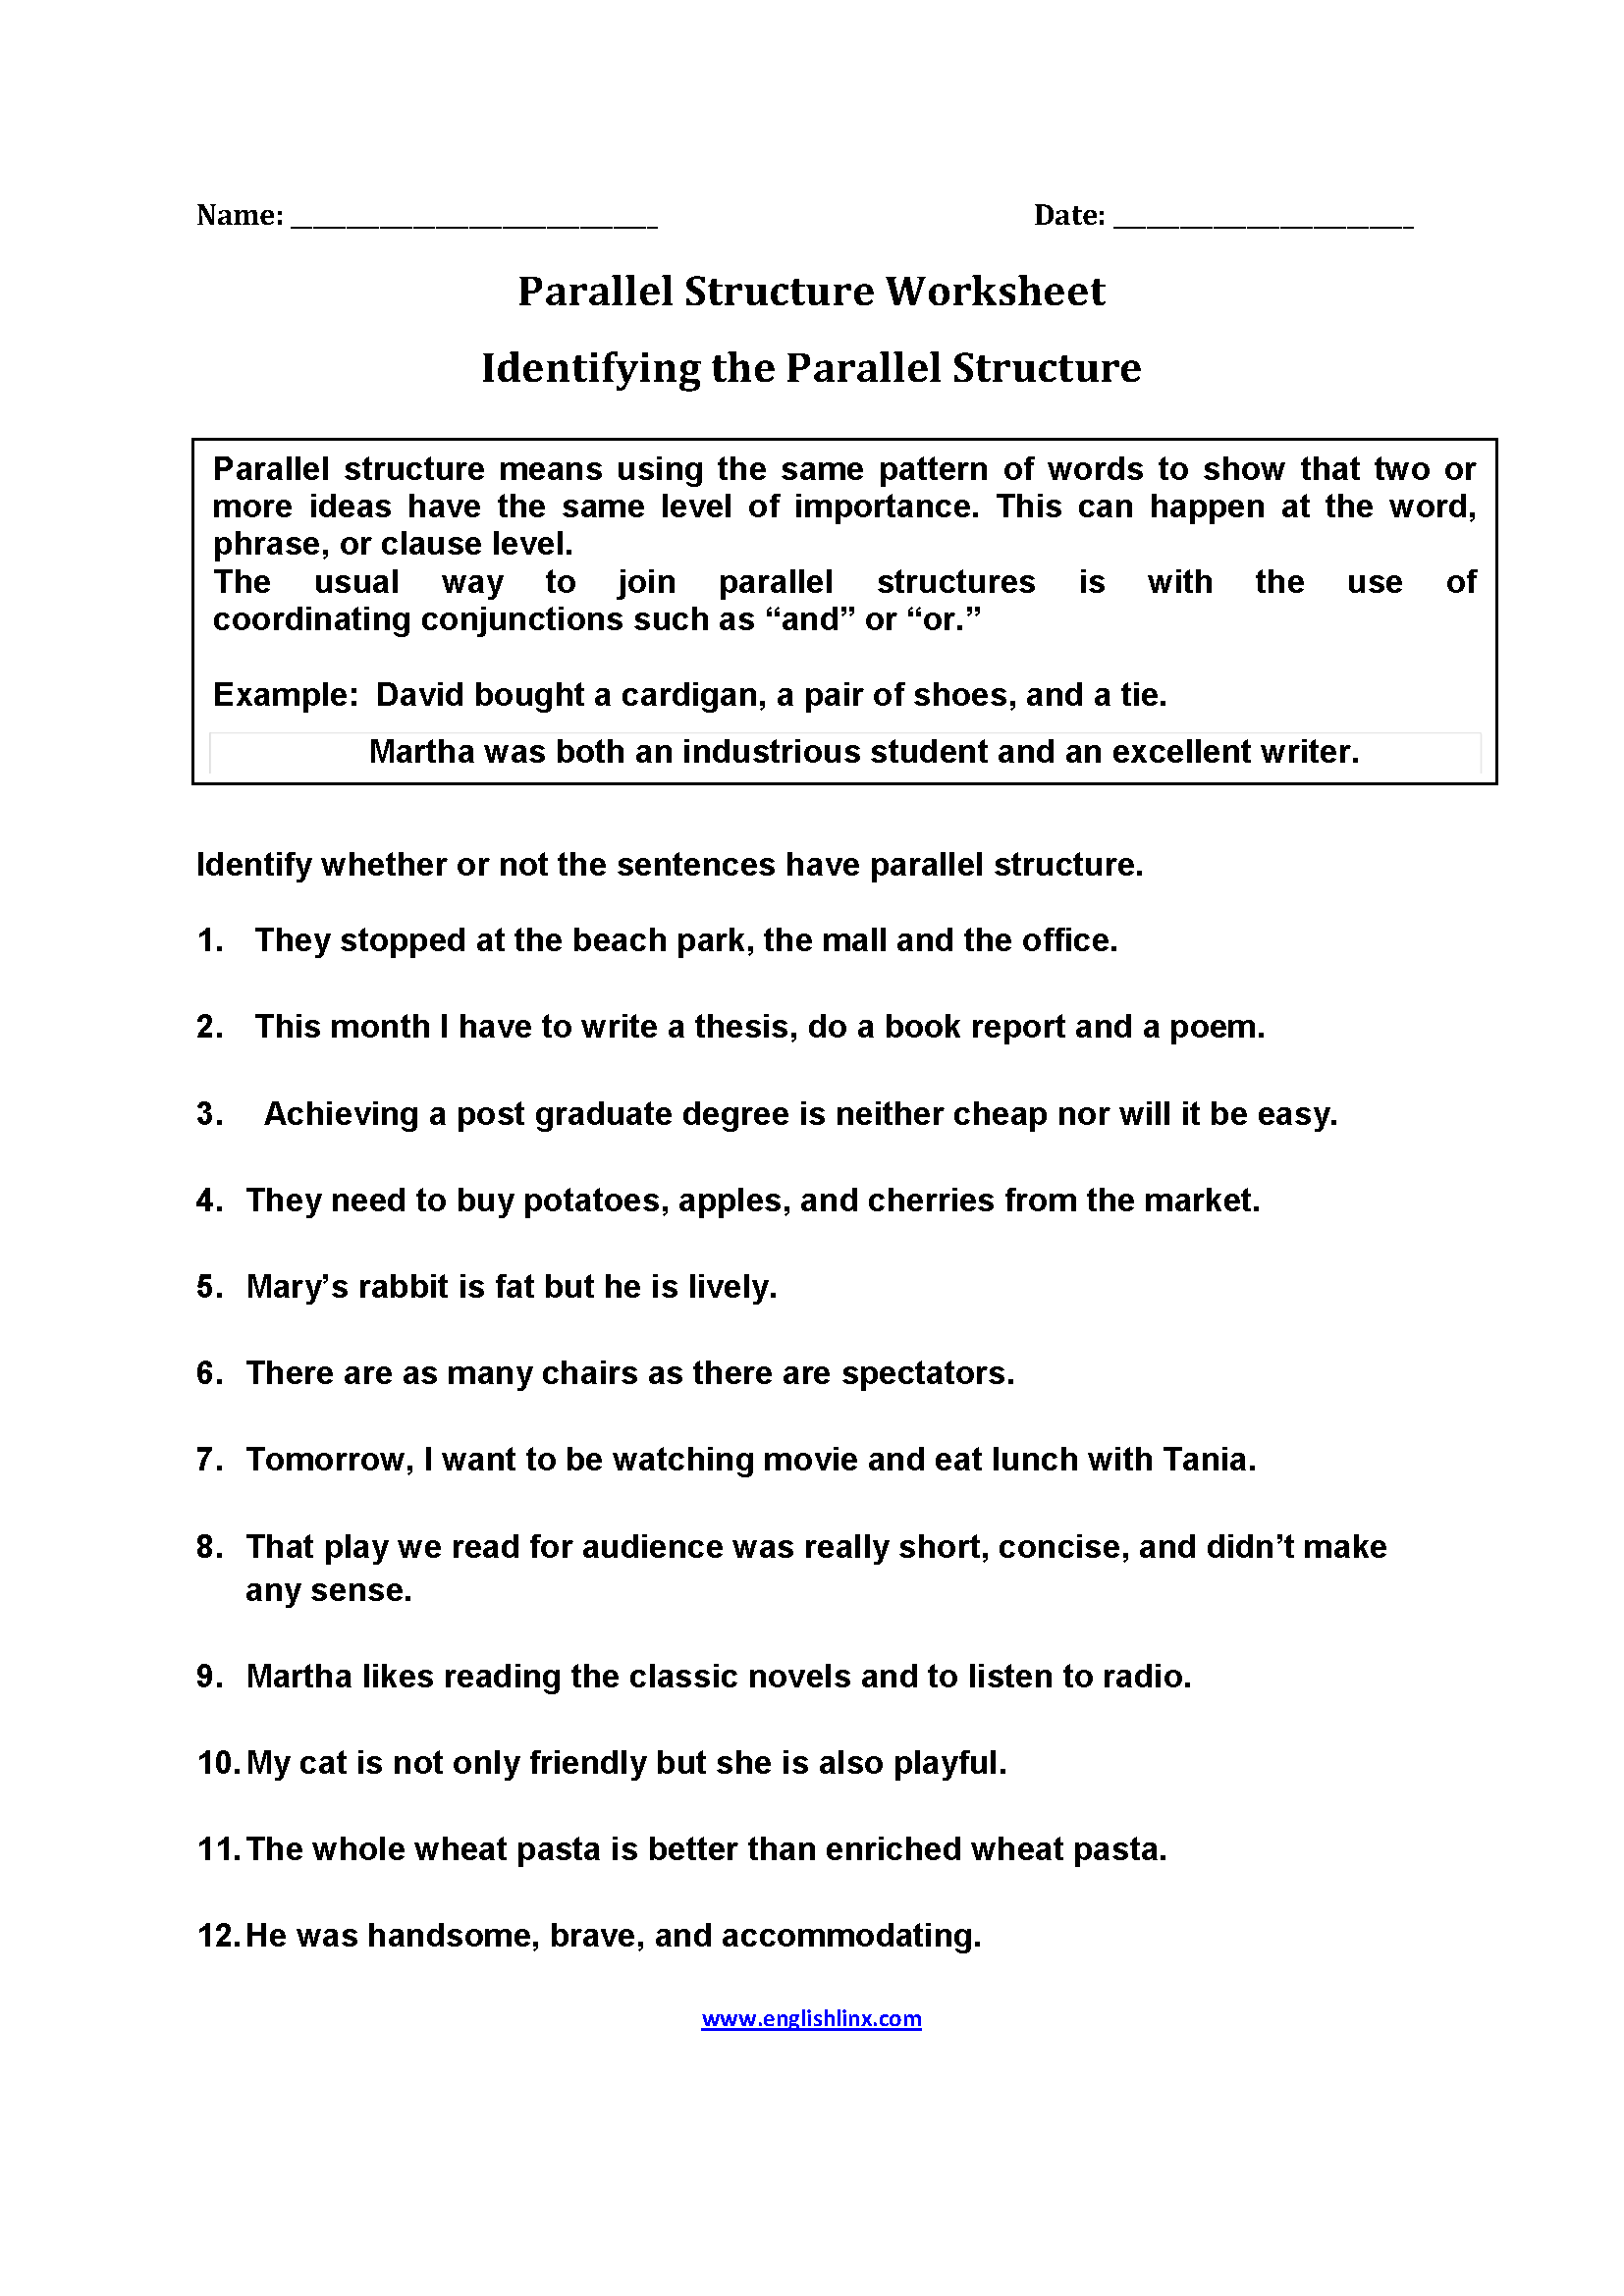 Parallel Structure Worksheets Identifying Parallel Structure Worksheets